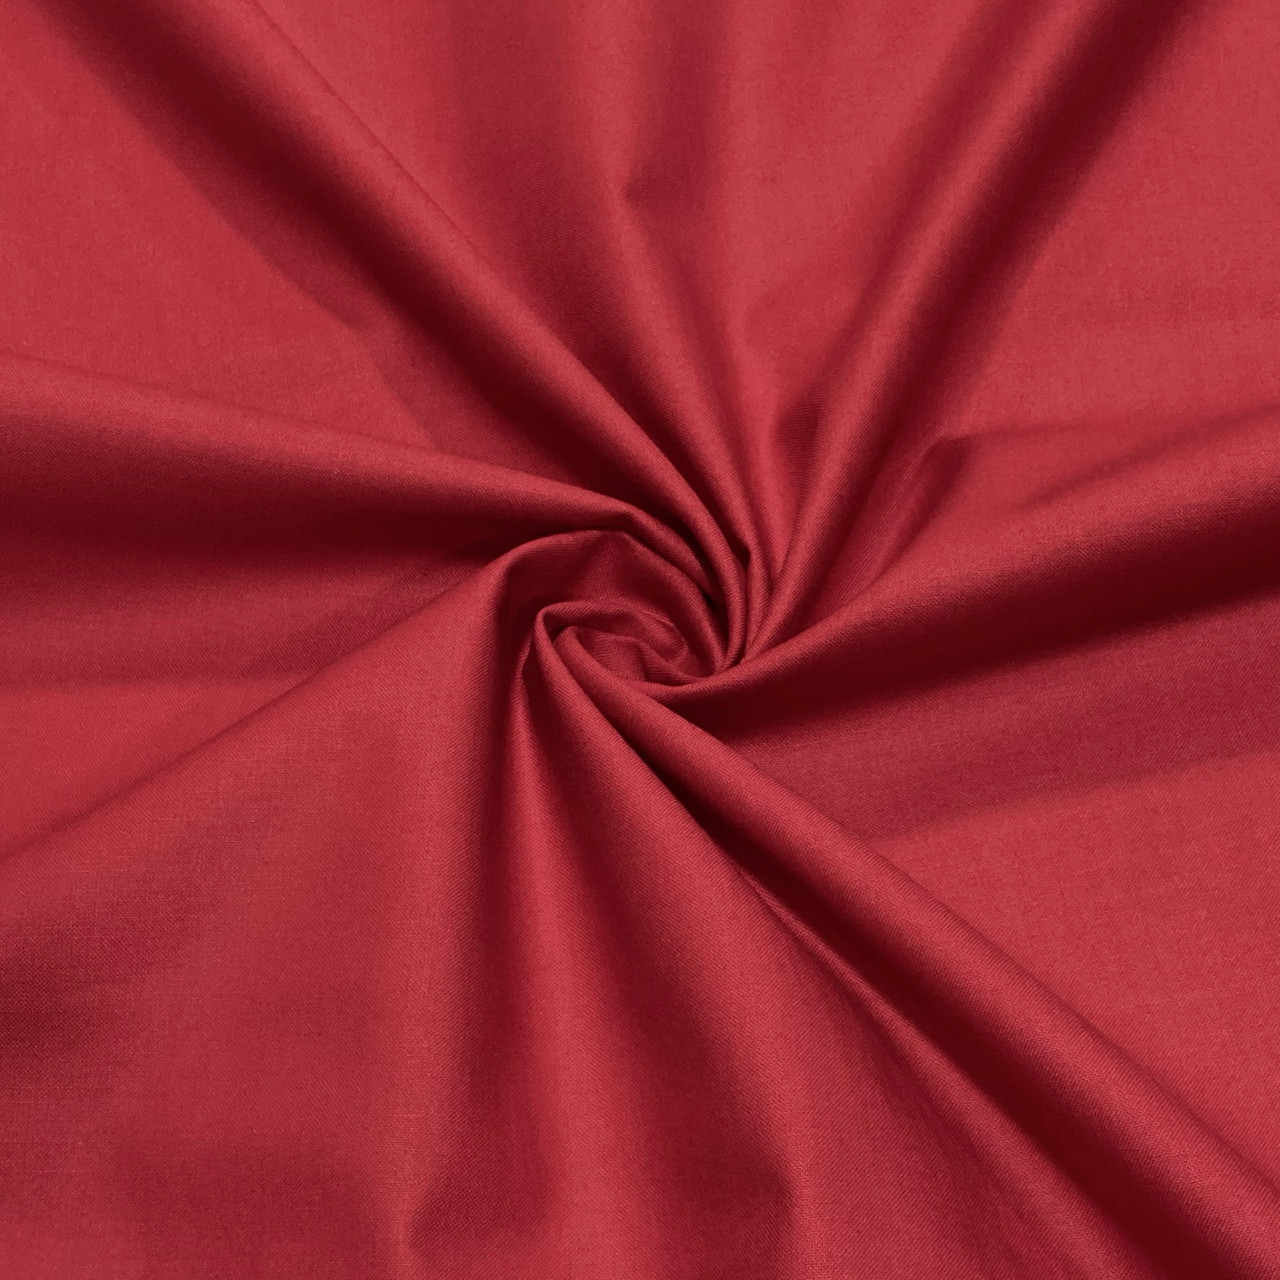 Solid Wine Red Cotton Sheeting Fabric-Coordinating Wine Solid Cotton Fabric